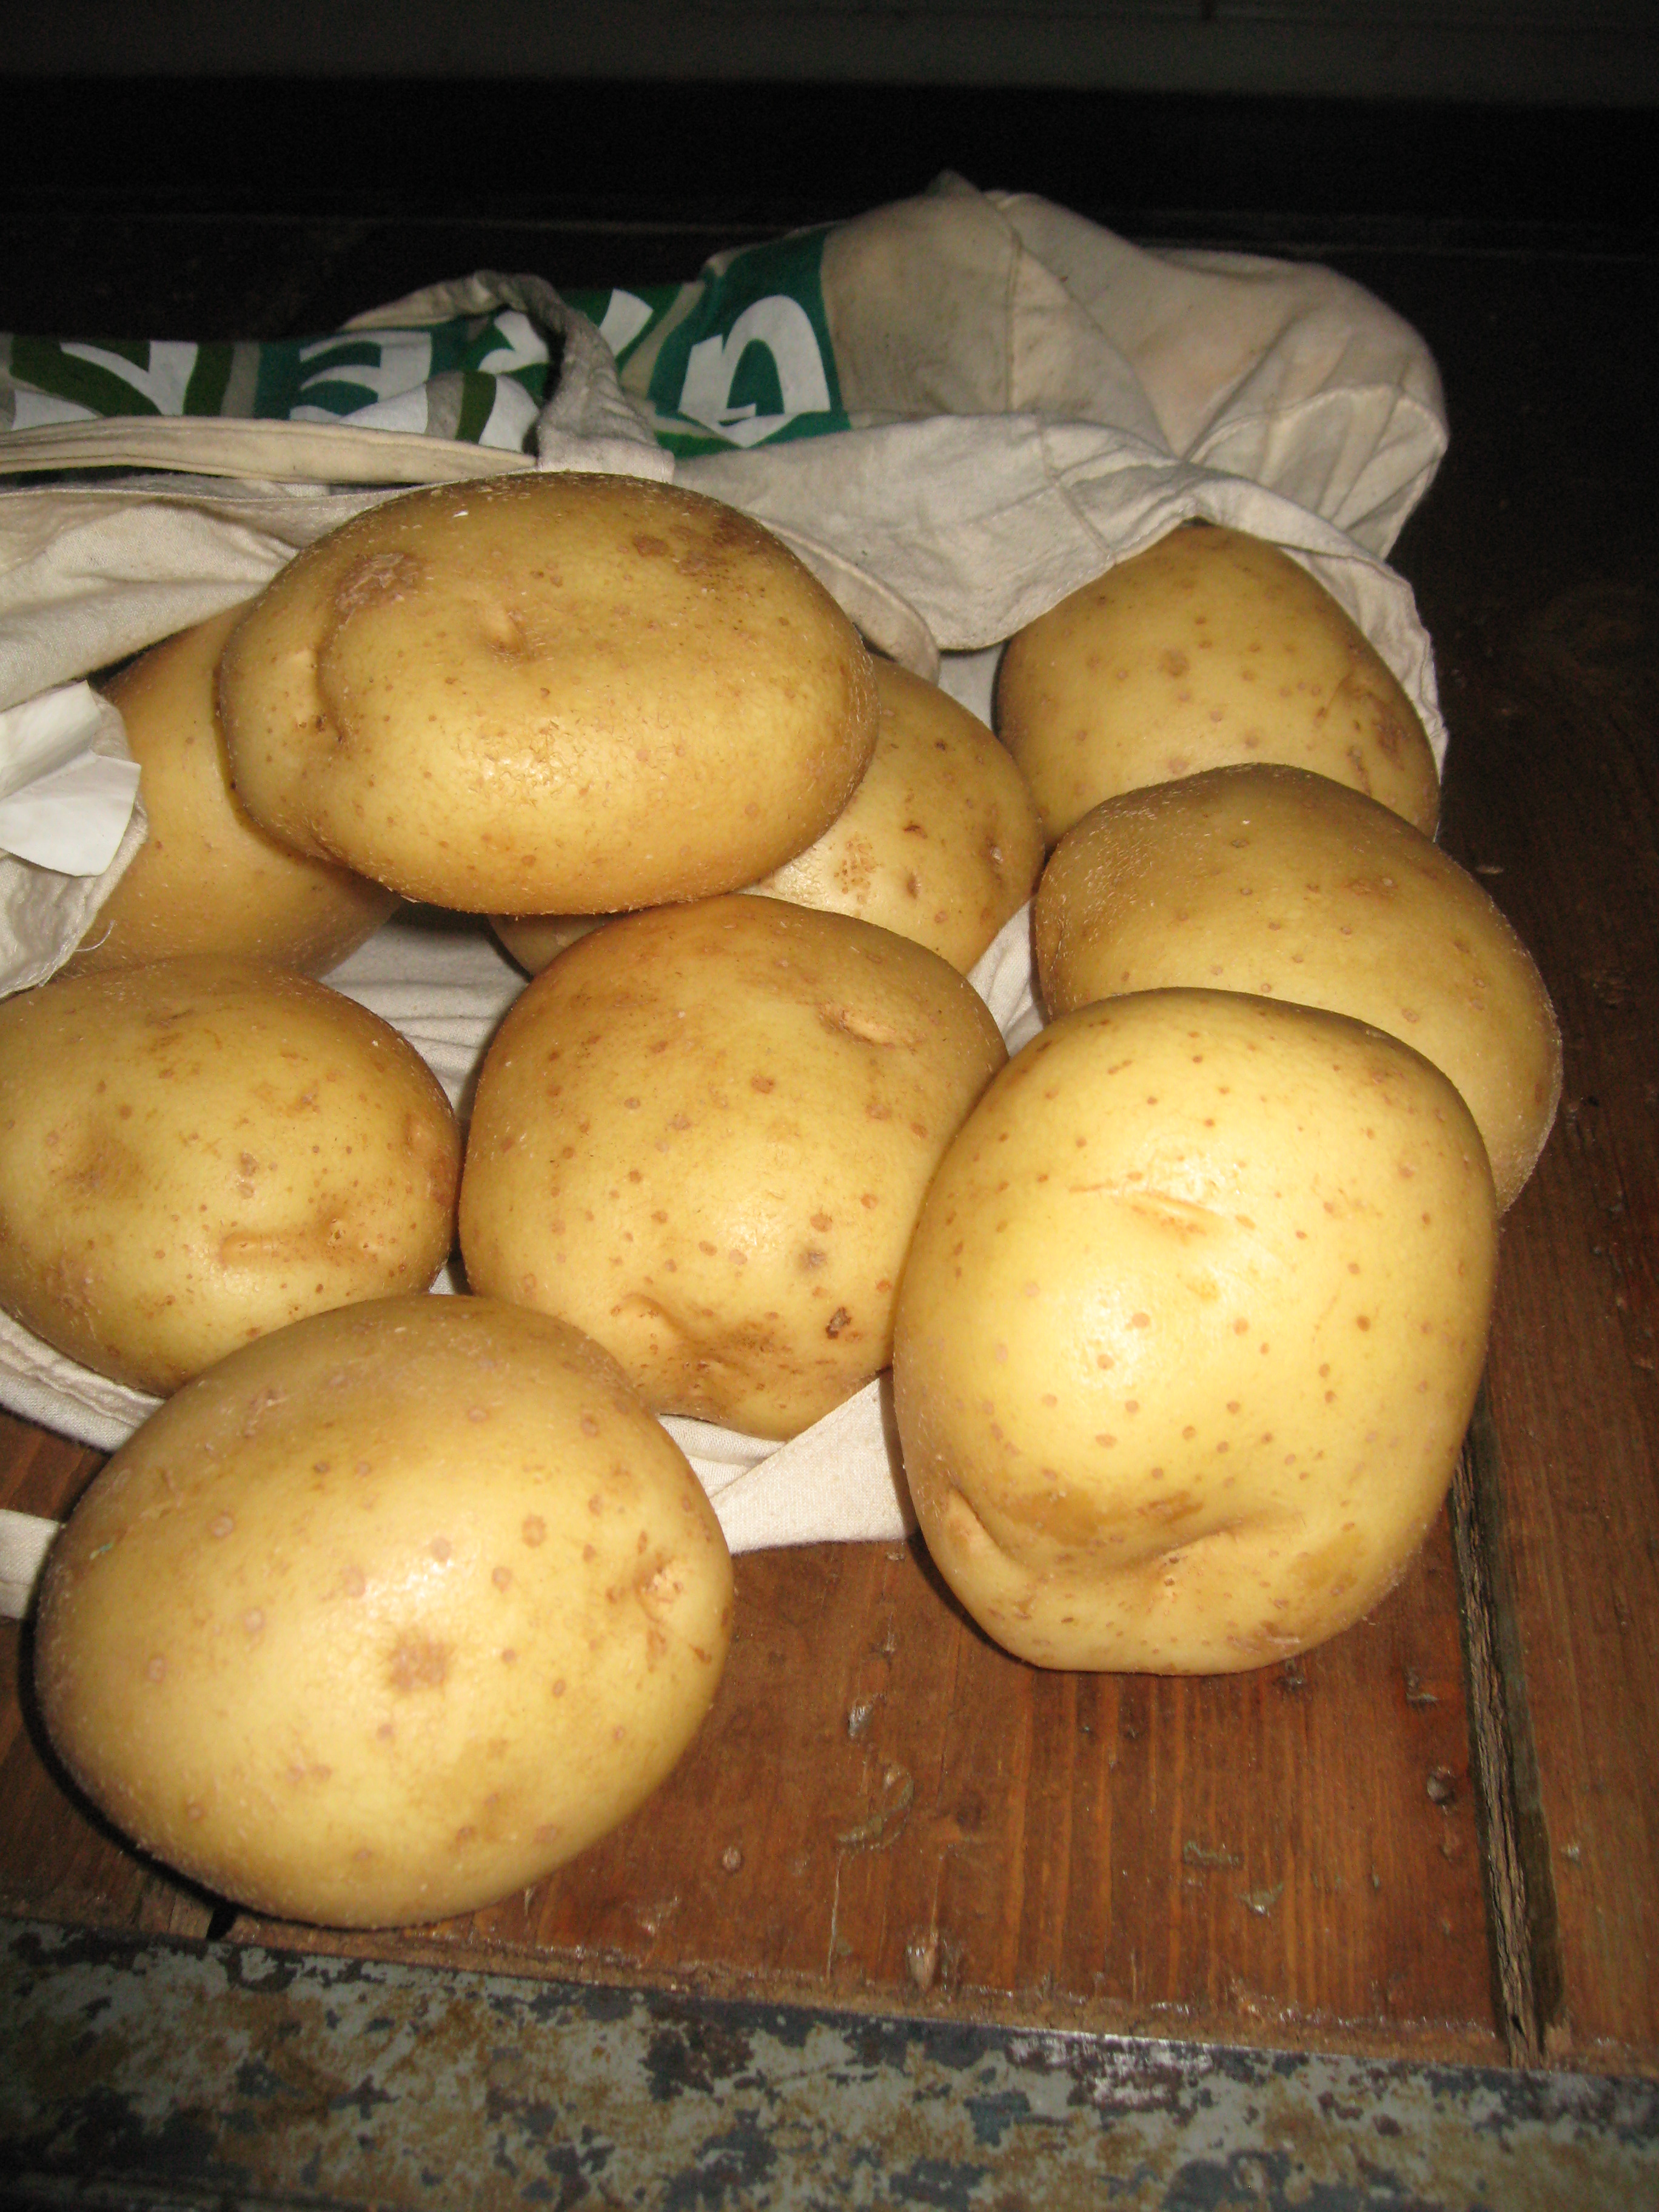 What is the scientific name for potato?